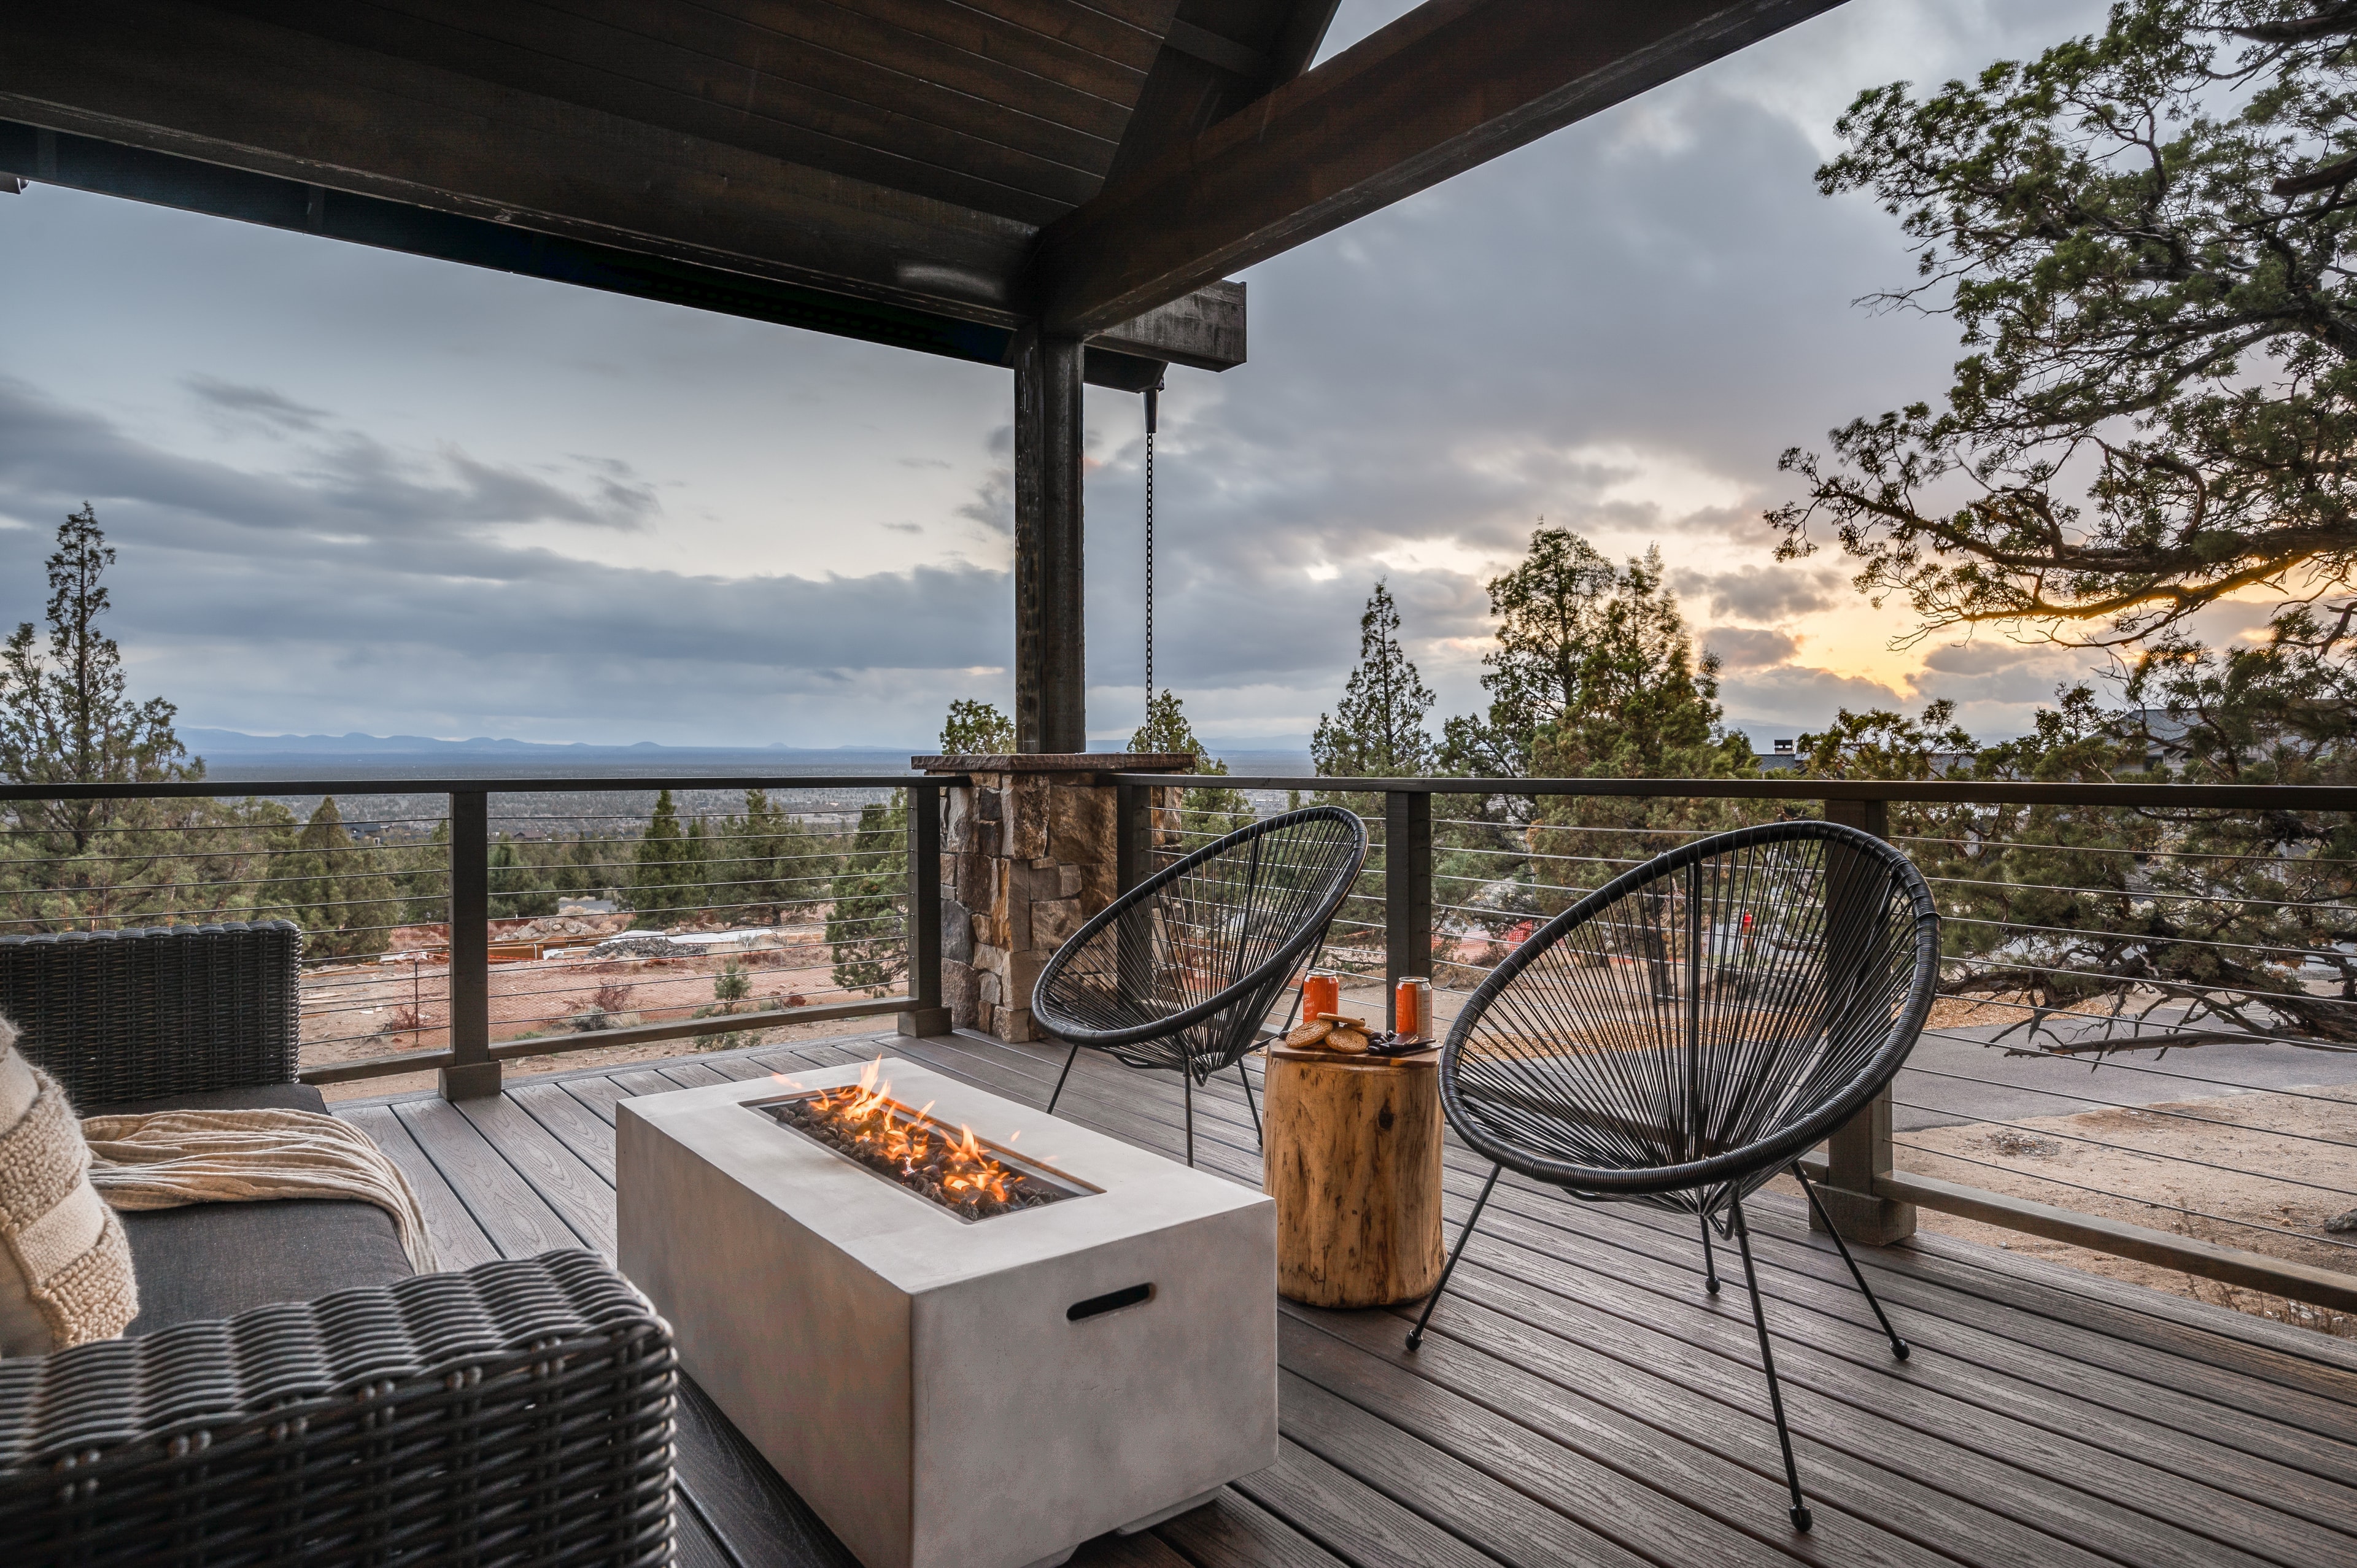 Sit by the outdoor fireplace and enjoy the view.